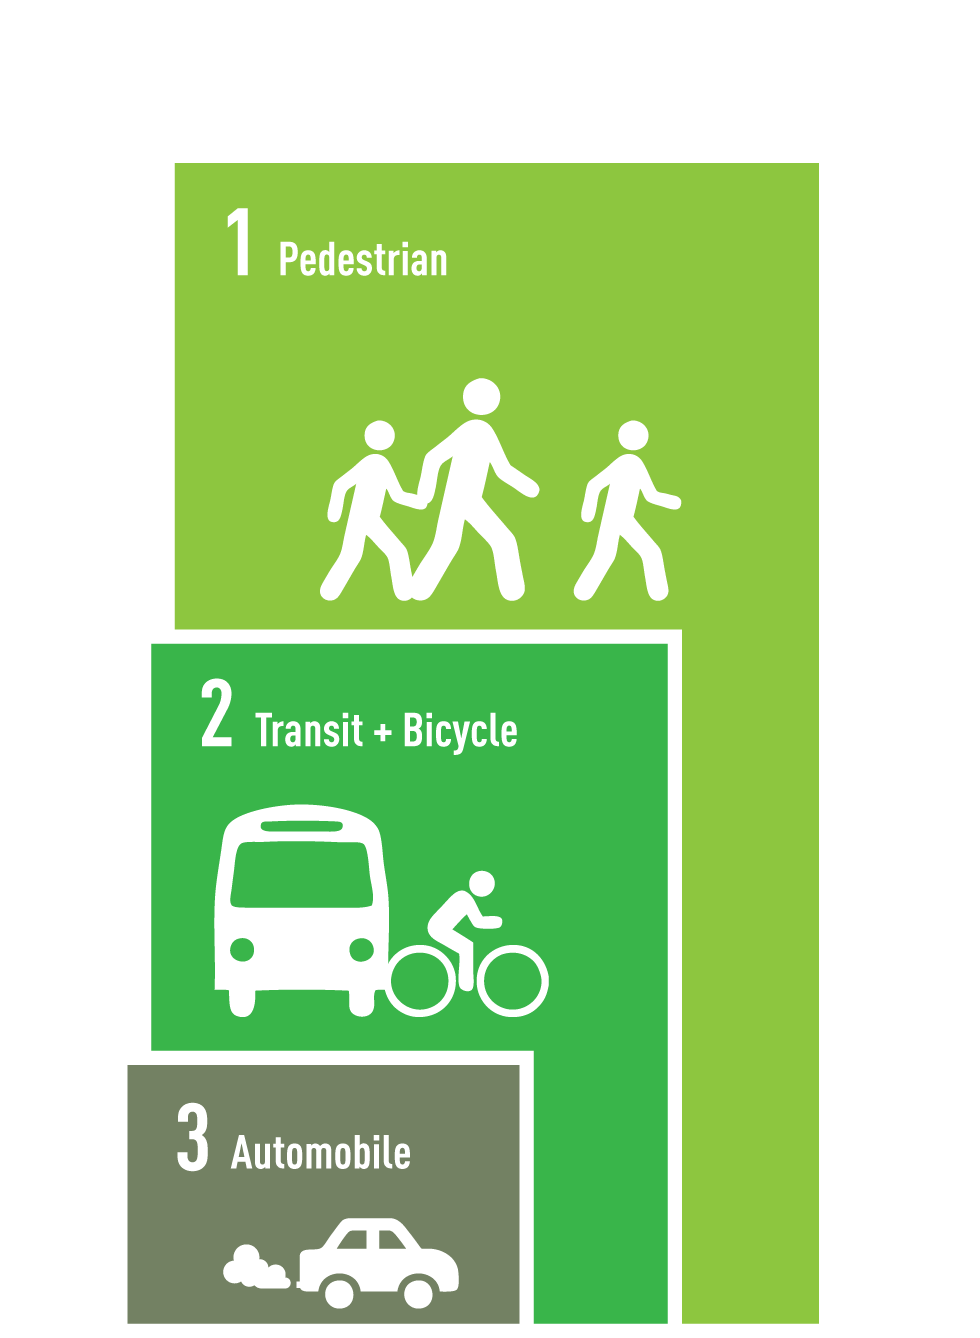 Pedestrians, cyclists, and transit riders in Rochester (and across New York state) will soon benefit from a new Complete Streets law. Thanks to the volunteers at Reconnect Rochester and outspoken citizens like you! [IMAGE: Reconnect Rochester]